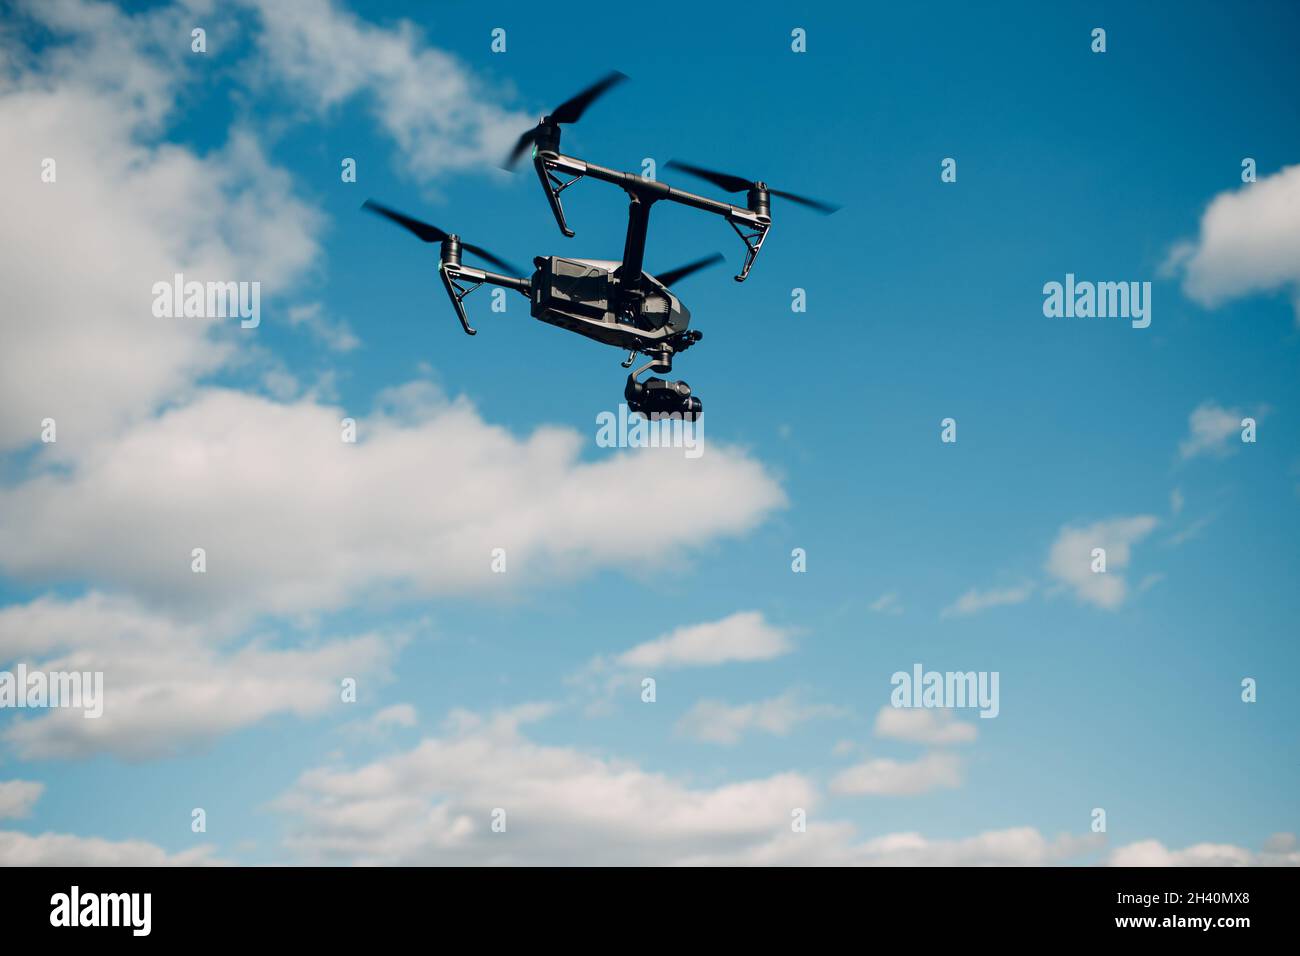 Big quadcopter drone against blue sky aerial flight and filming. Stock Photo